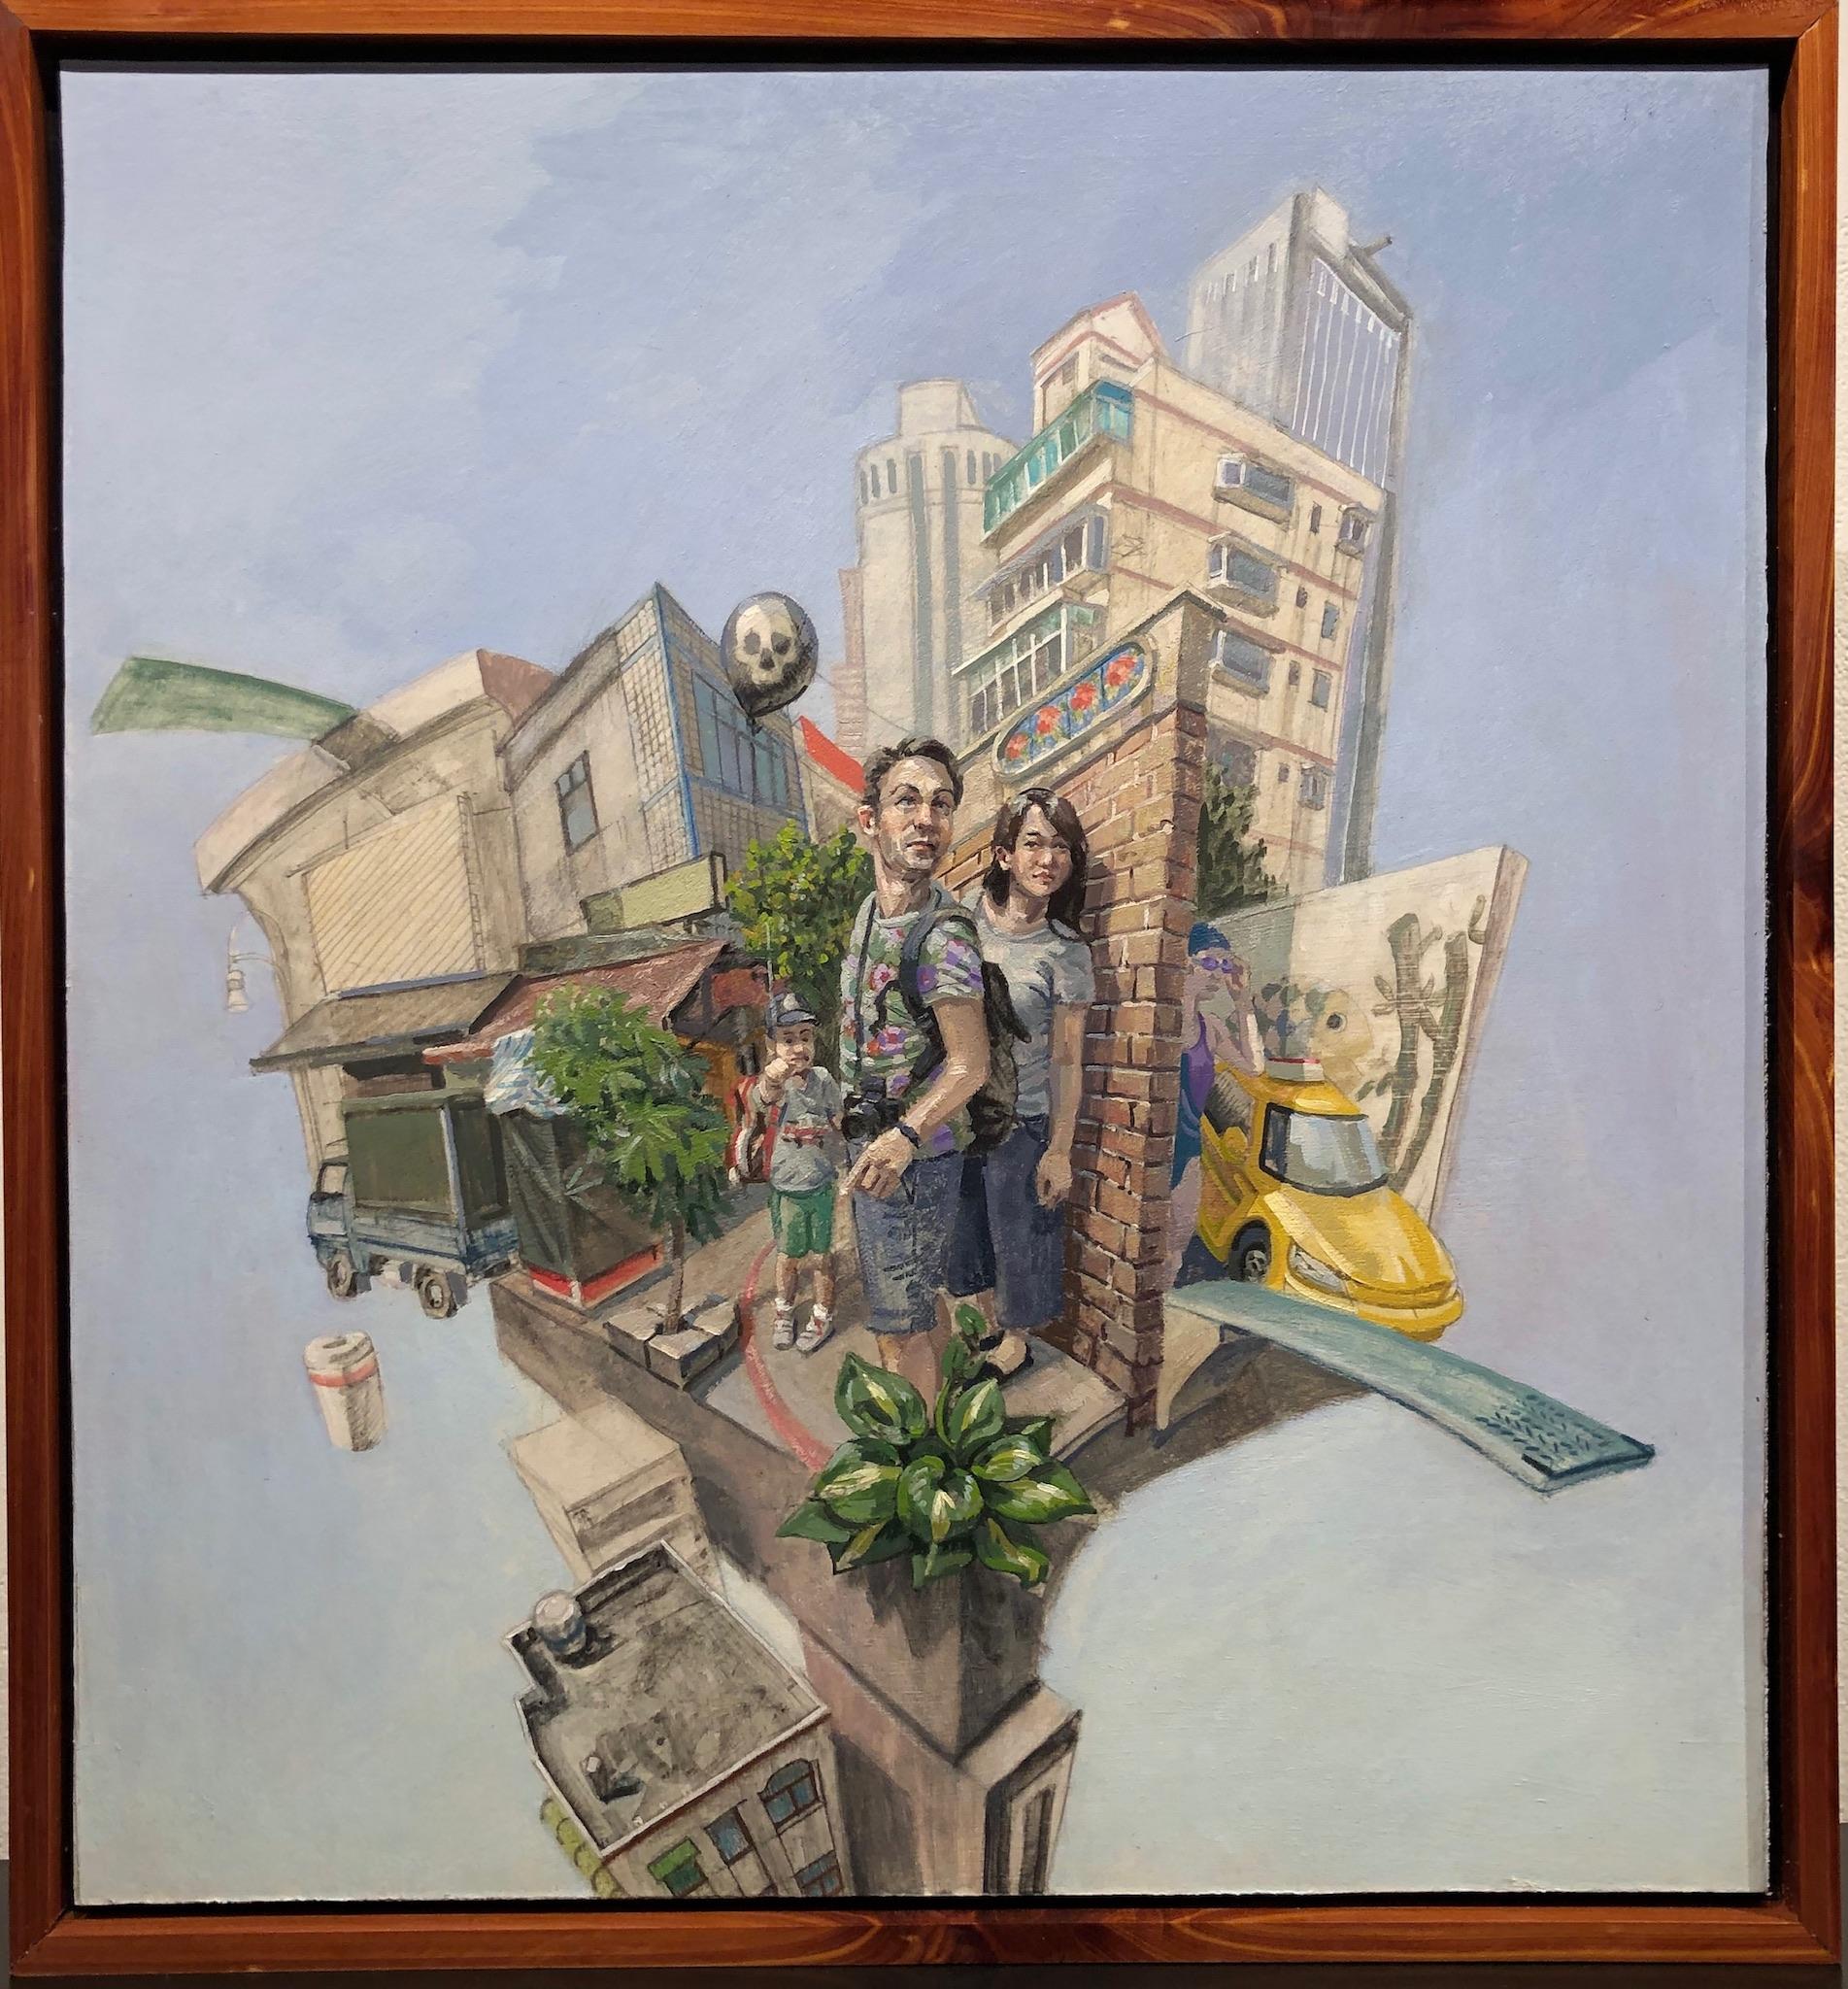 Lost in Taipei - Ximending, Surrealist Landscape, Architectural Elements - Painting by Benjamin Duke